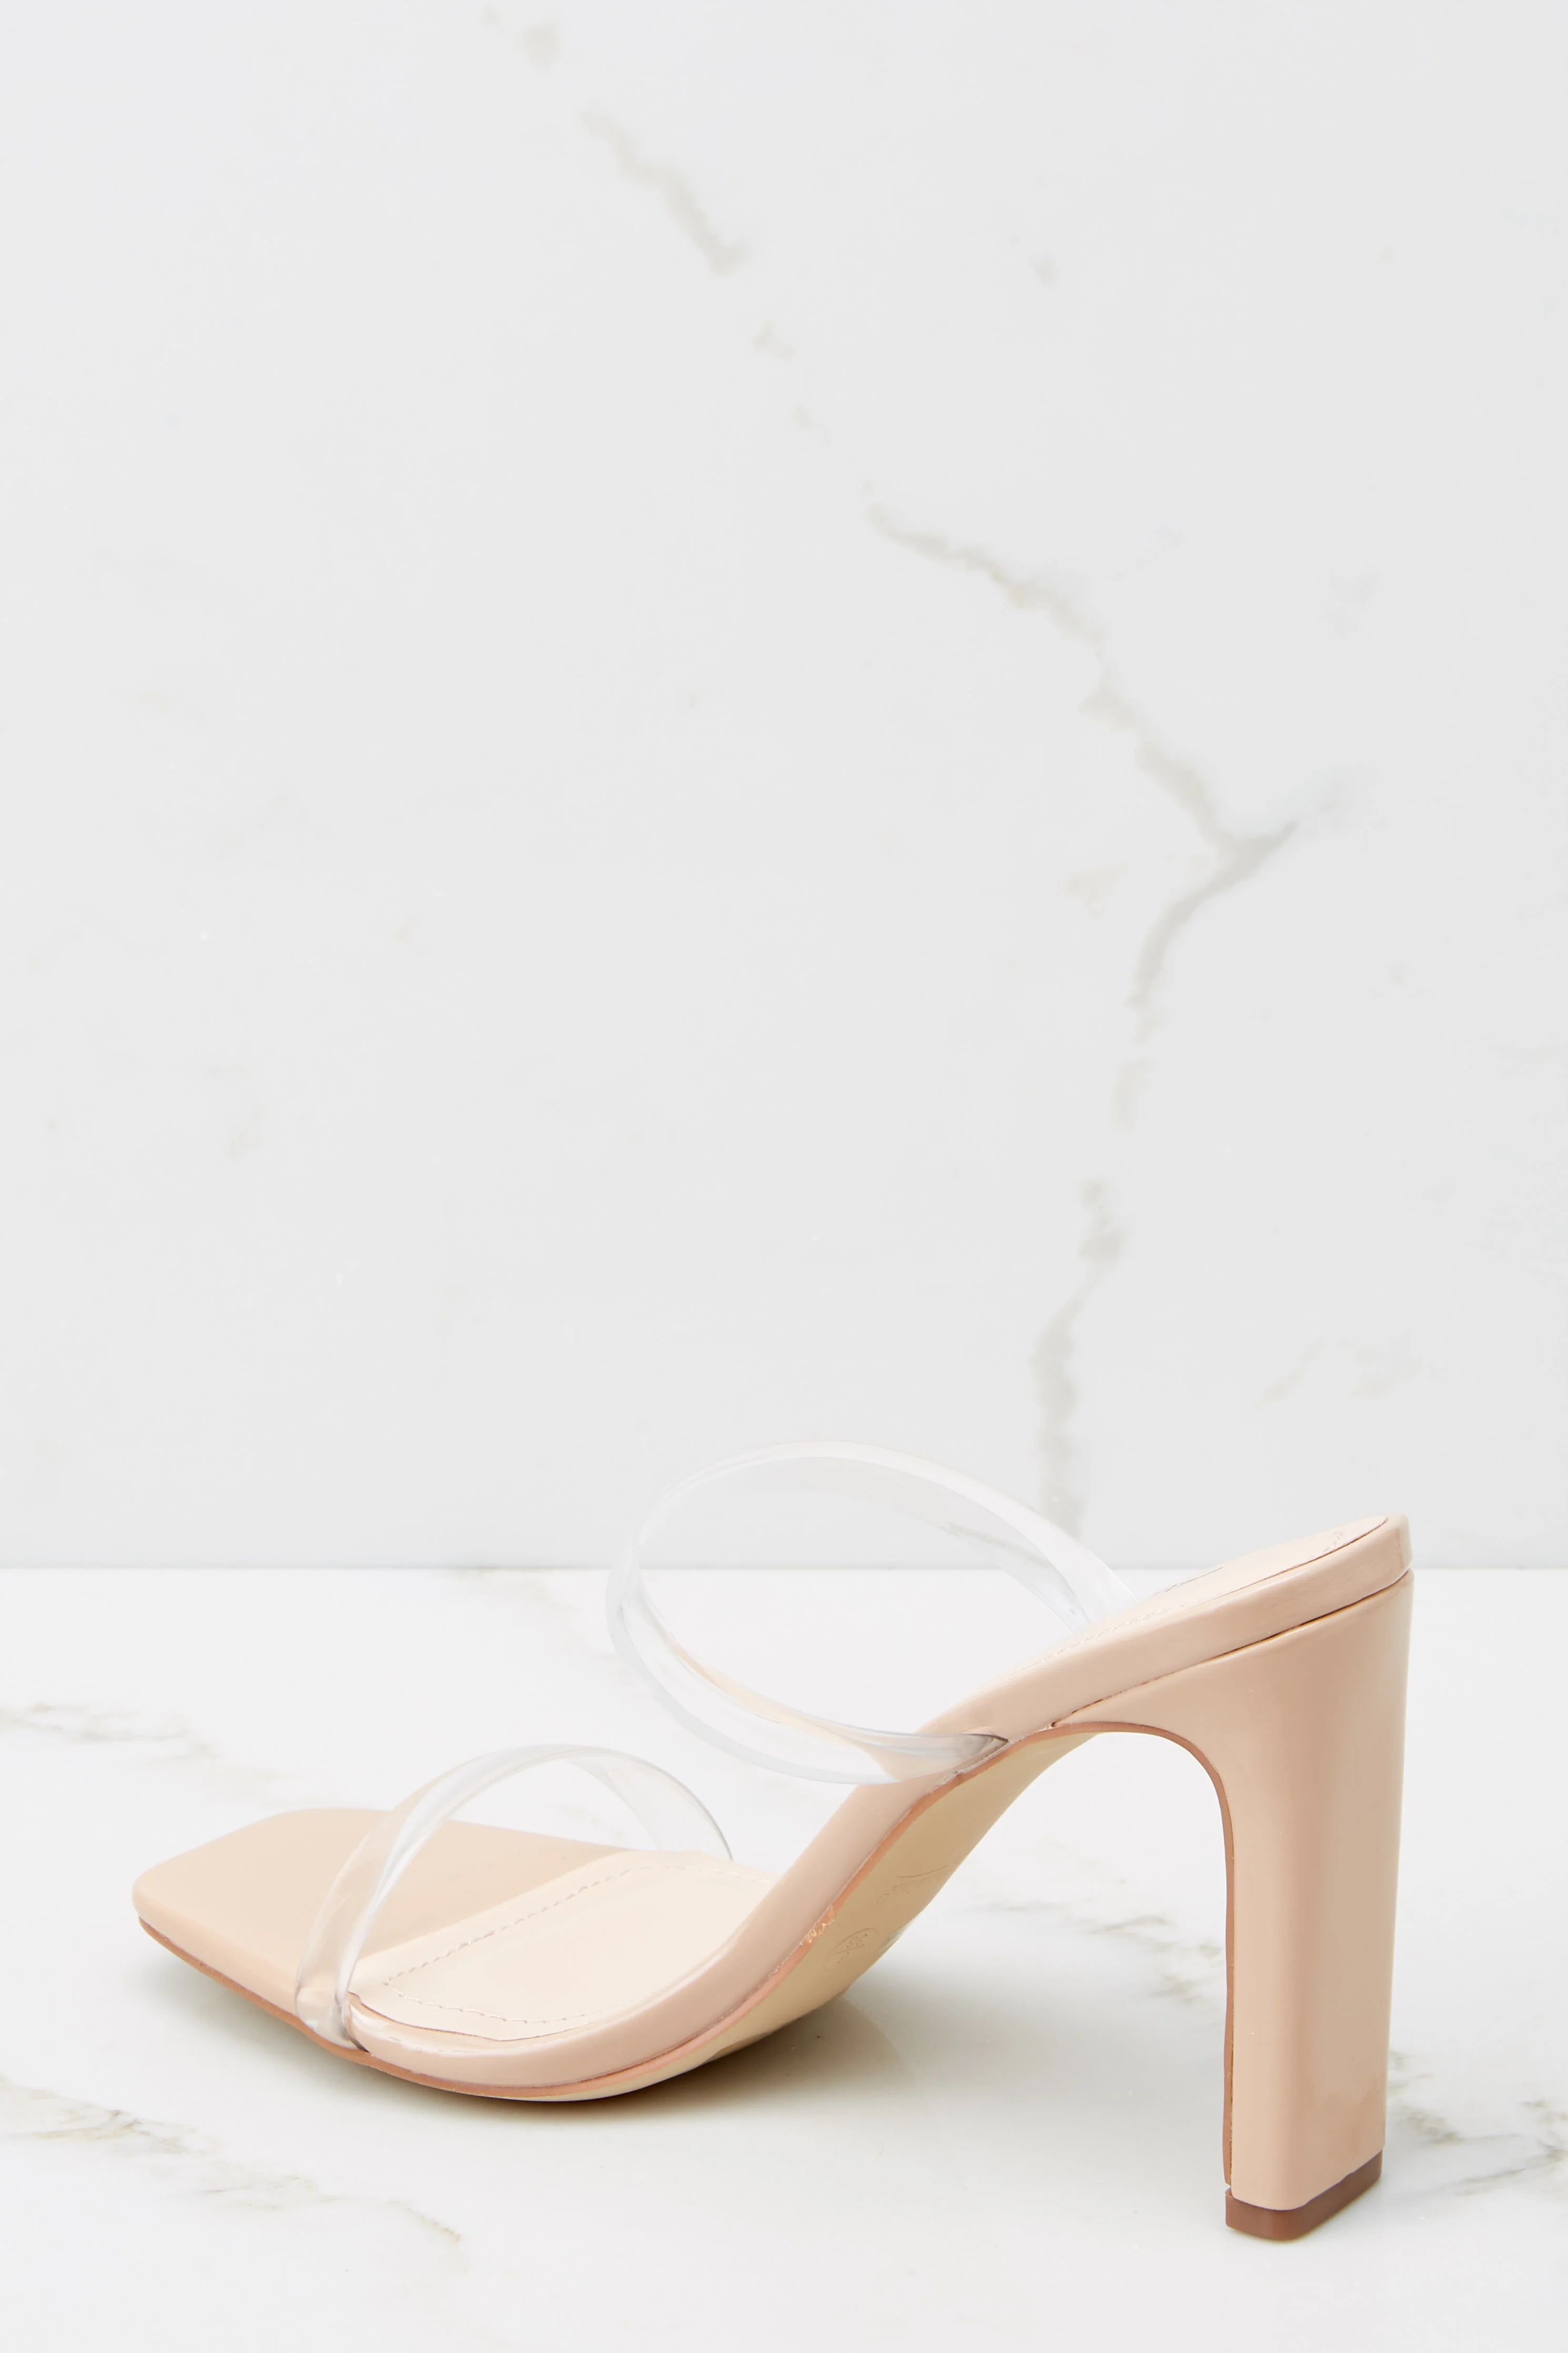 Sleek Strides Nude And Clear Heels | Red Dress 